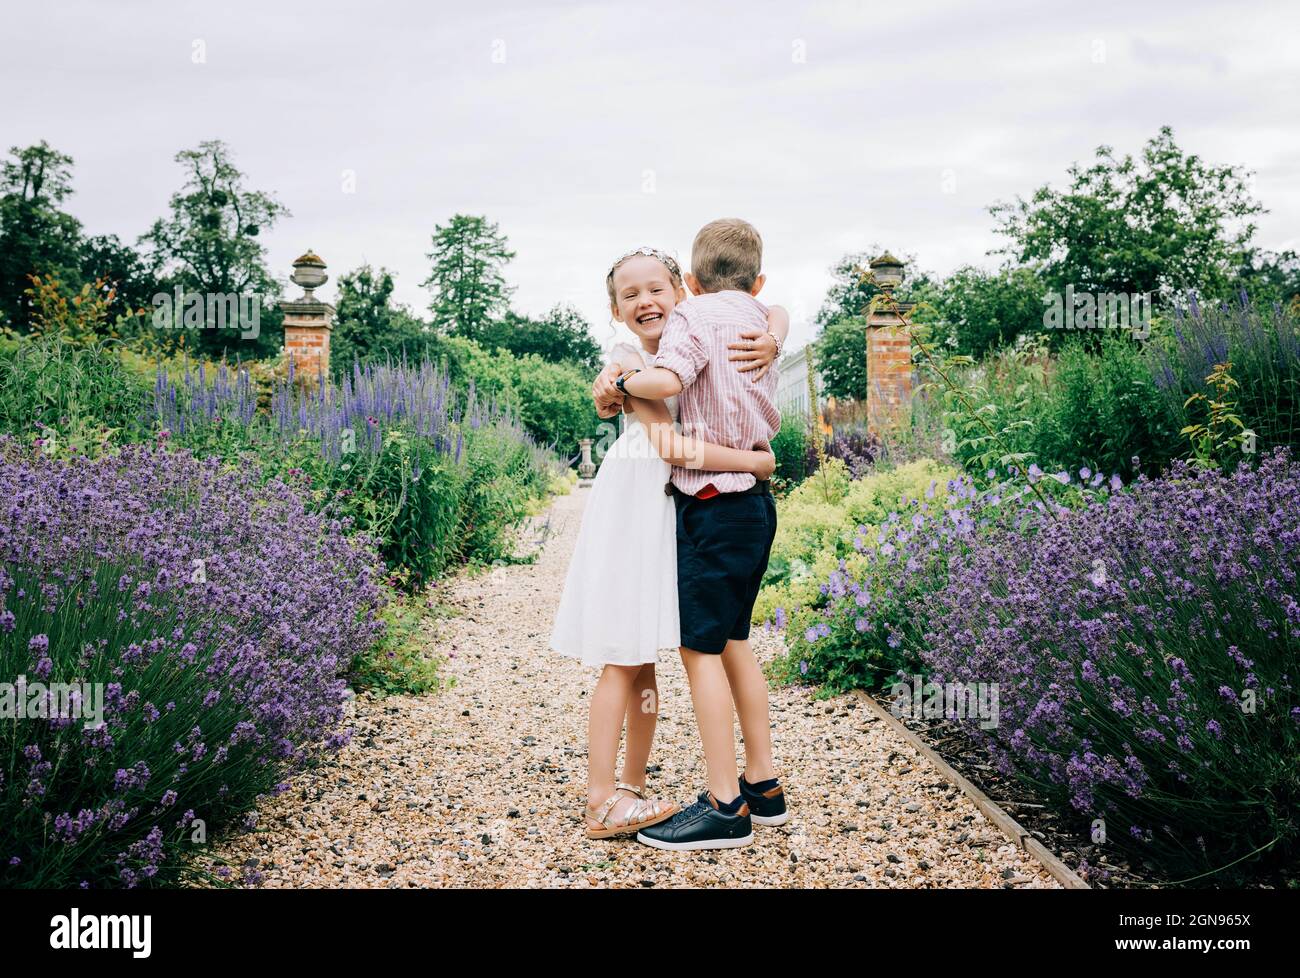 girl and boy hugging and laughing in a beautiful flower field Stock Photo